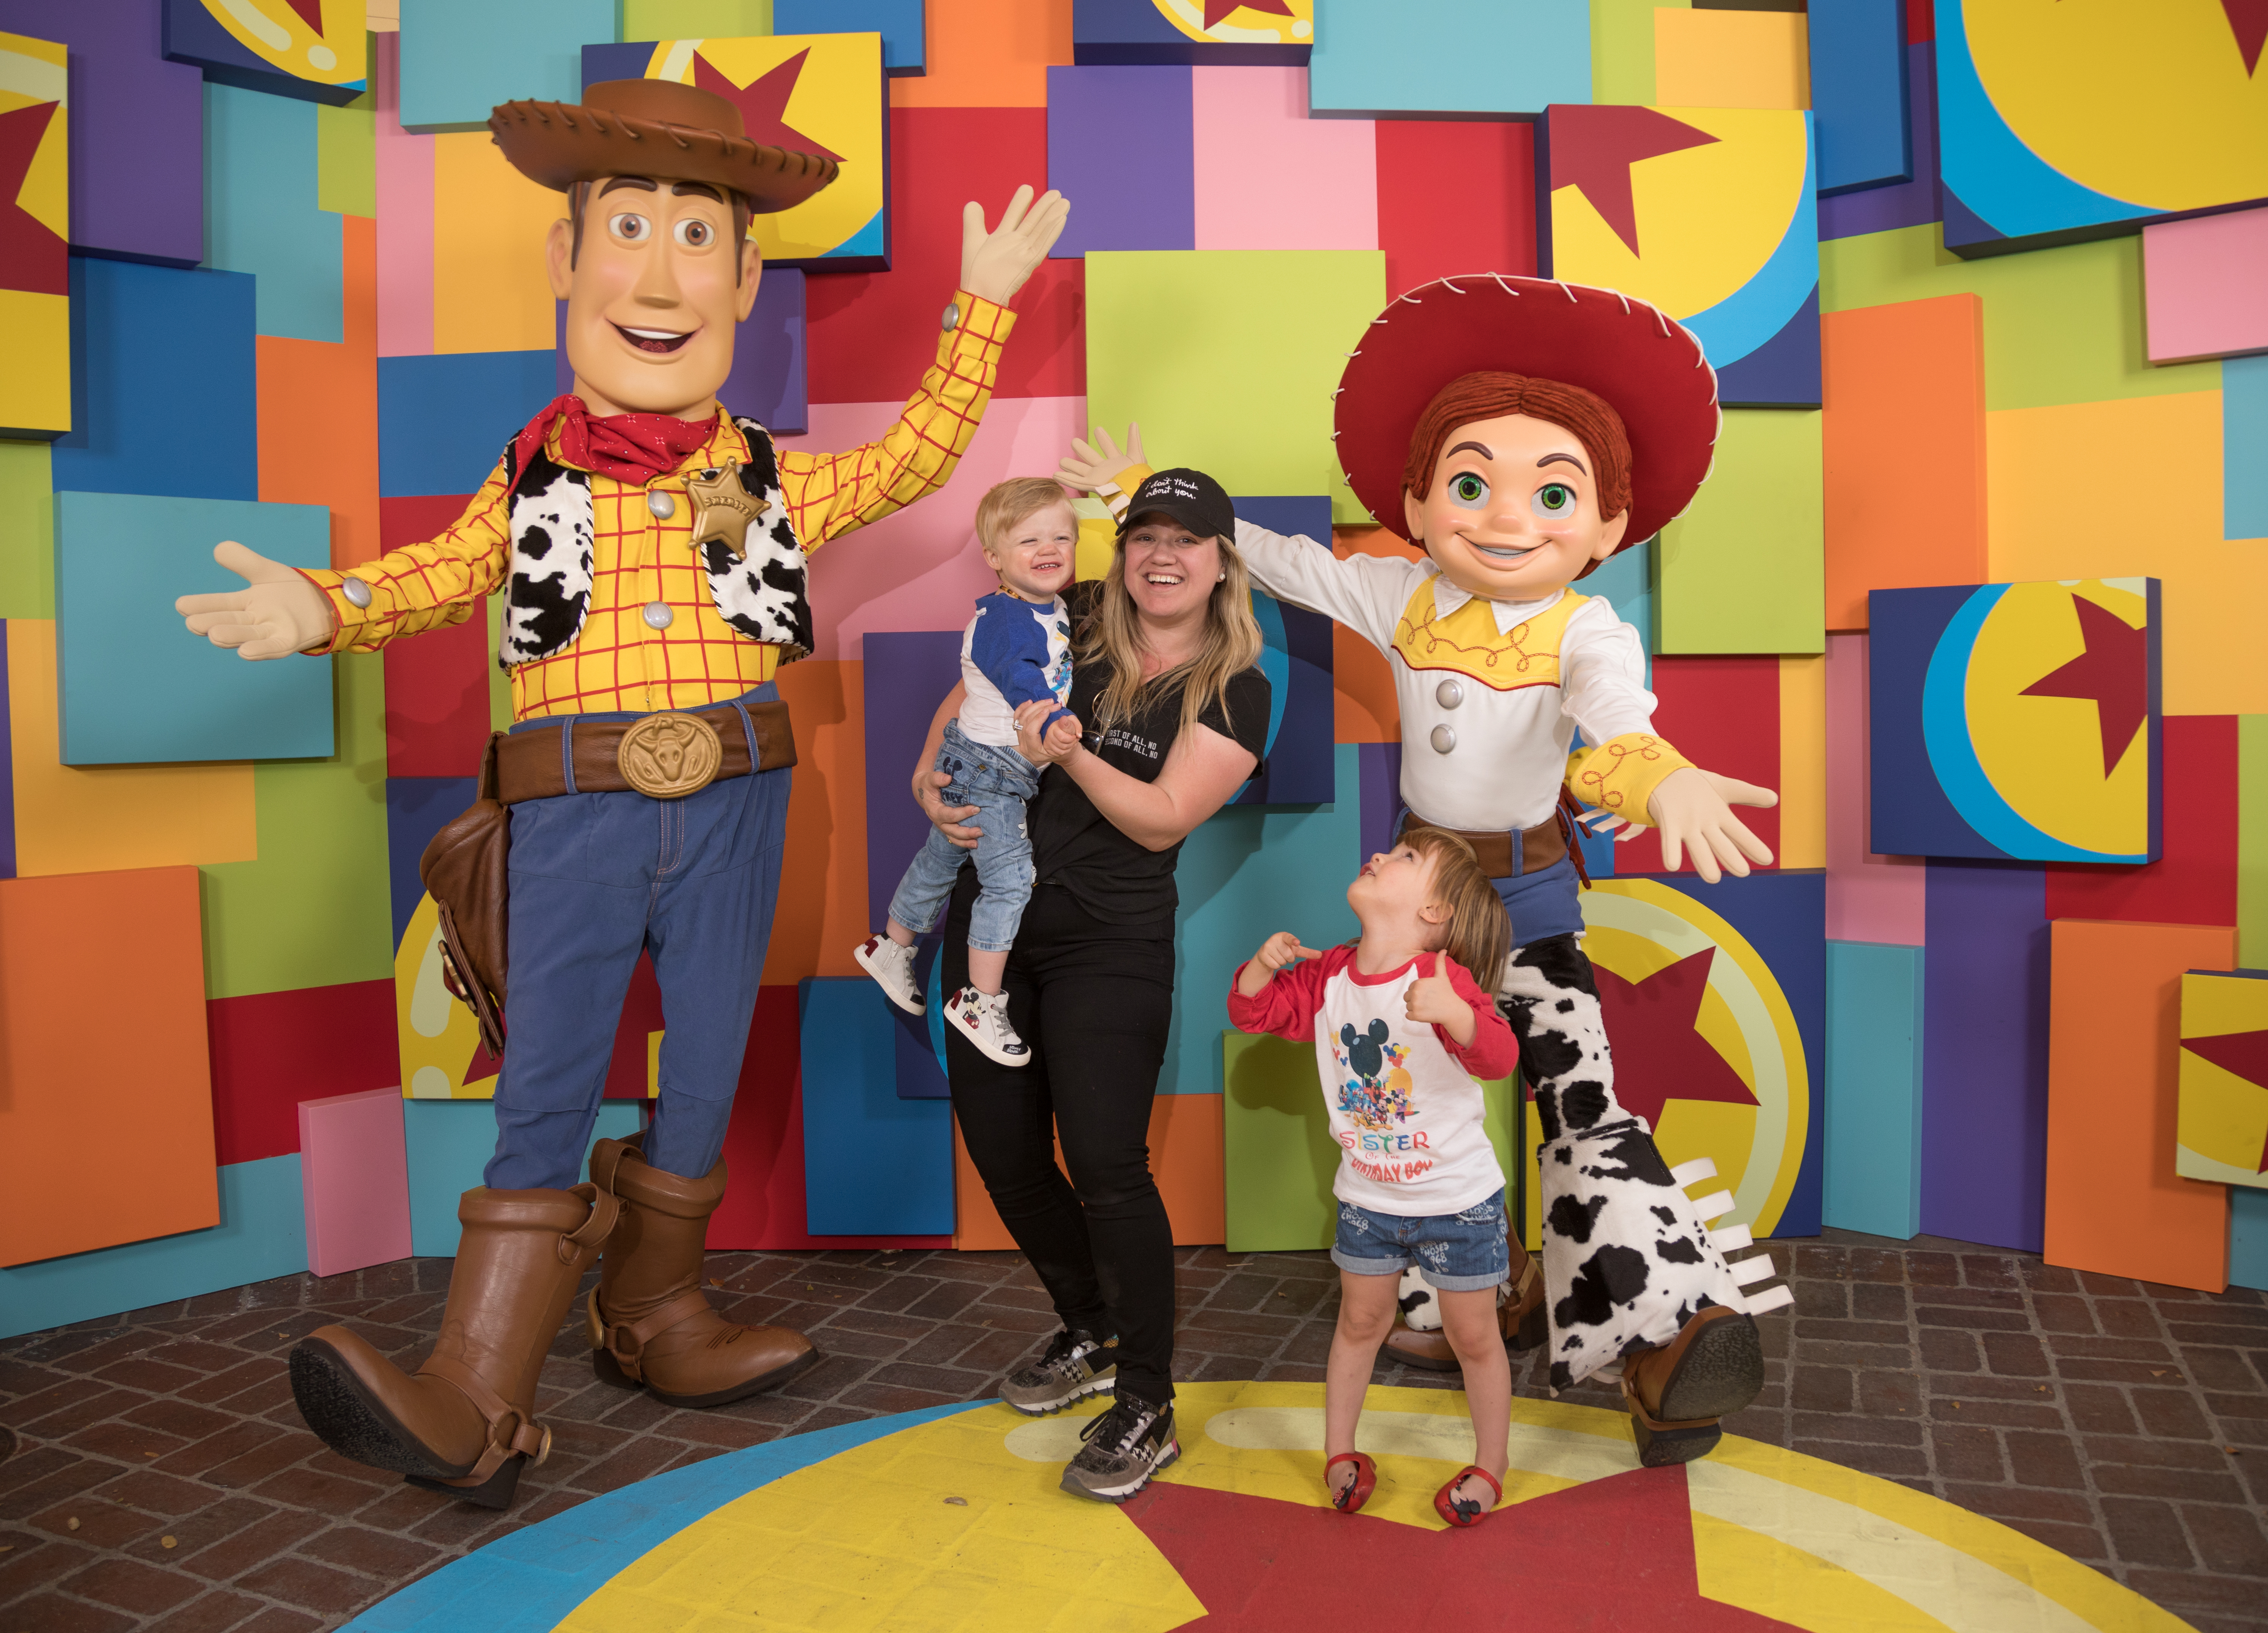 ANAHEIM, CA - APRIL 12: In this handout photo provided by Disneyland Resort, singer Kelly Clarkson and her children, Remington Alexander and River Rose, visit with Pixar pals Woody and Jessie at the launch of Pixar Fest at the Disneyland Resort in Anaheim, Calif., on Thursday. The first-ever Pixar Fest, the biggest Pixar celebration ever to come to Disney Parks, continues through Sept. 3, 2018. (Photo by Christian Thompson/Disneyland Resort via Getty Images)